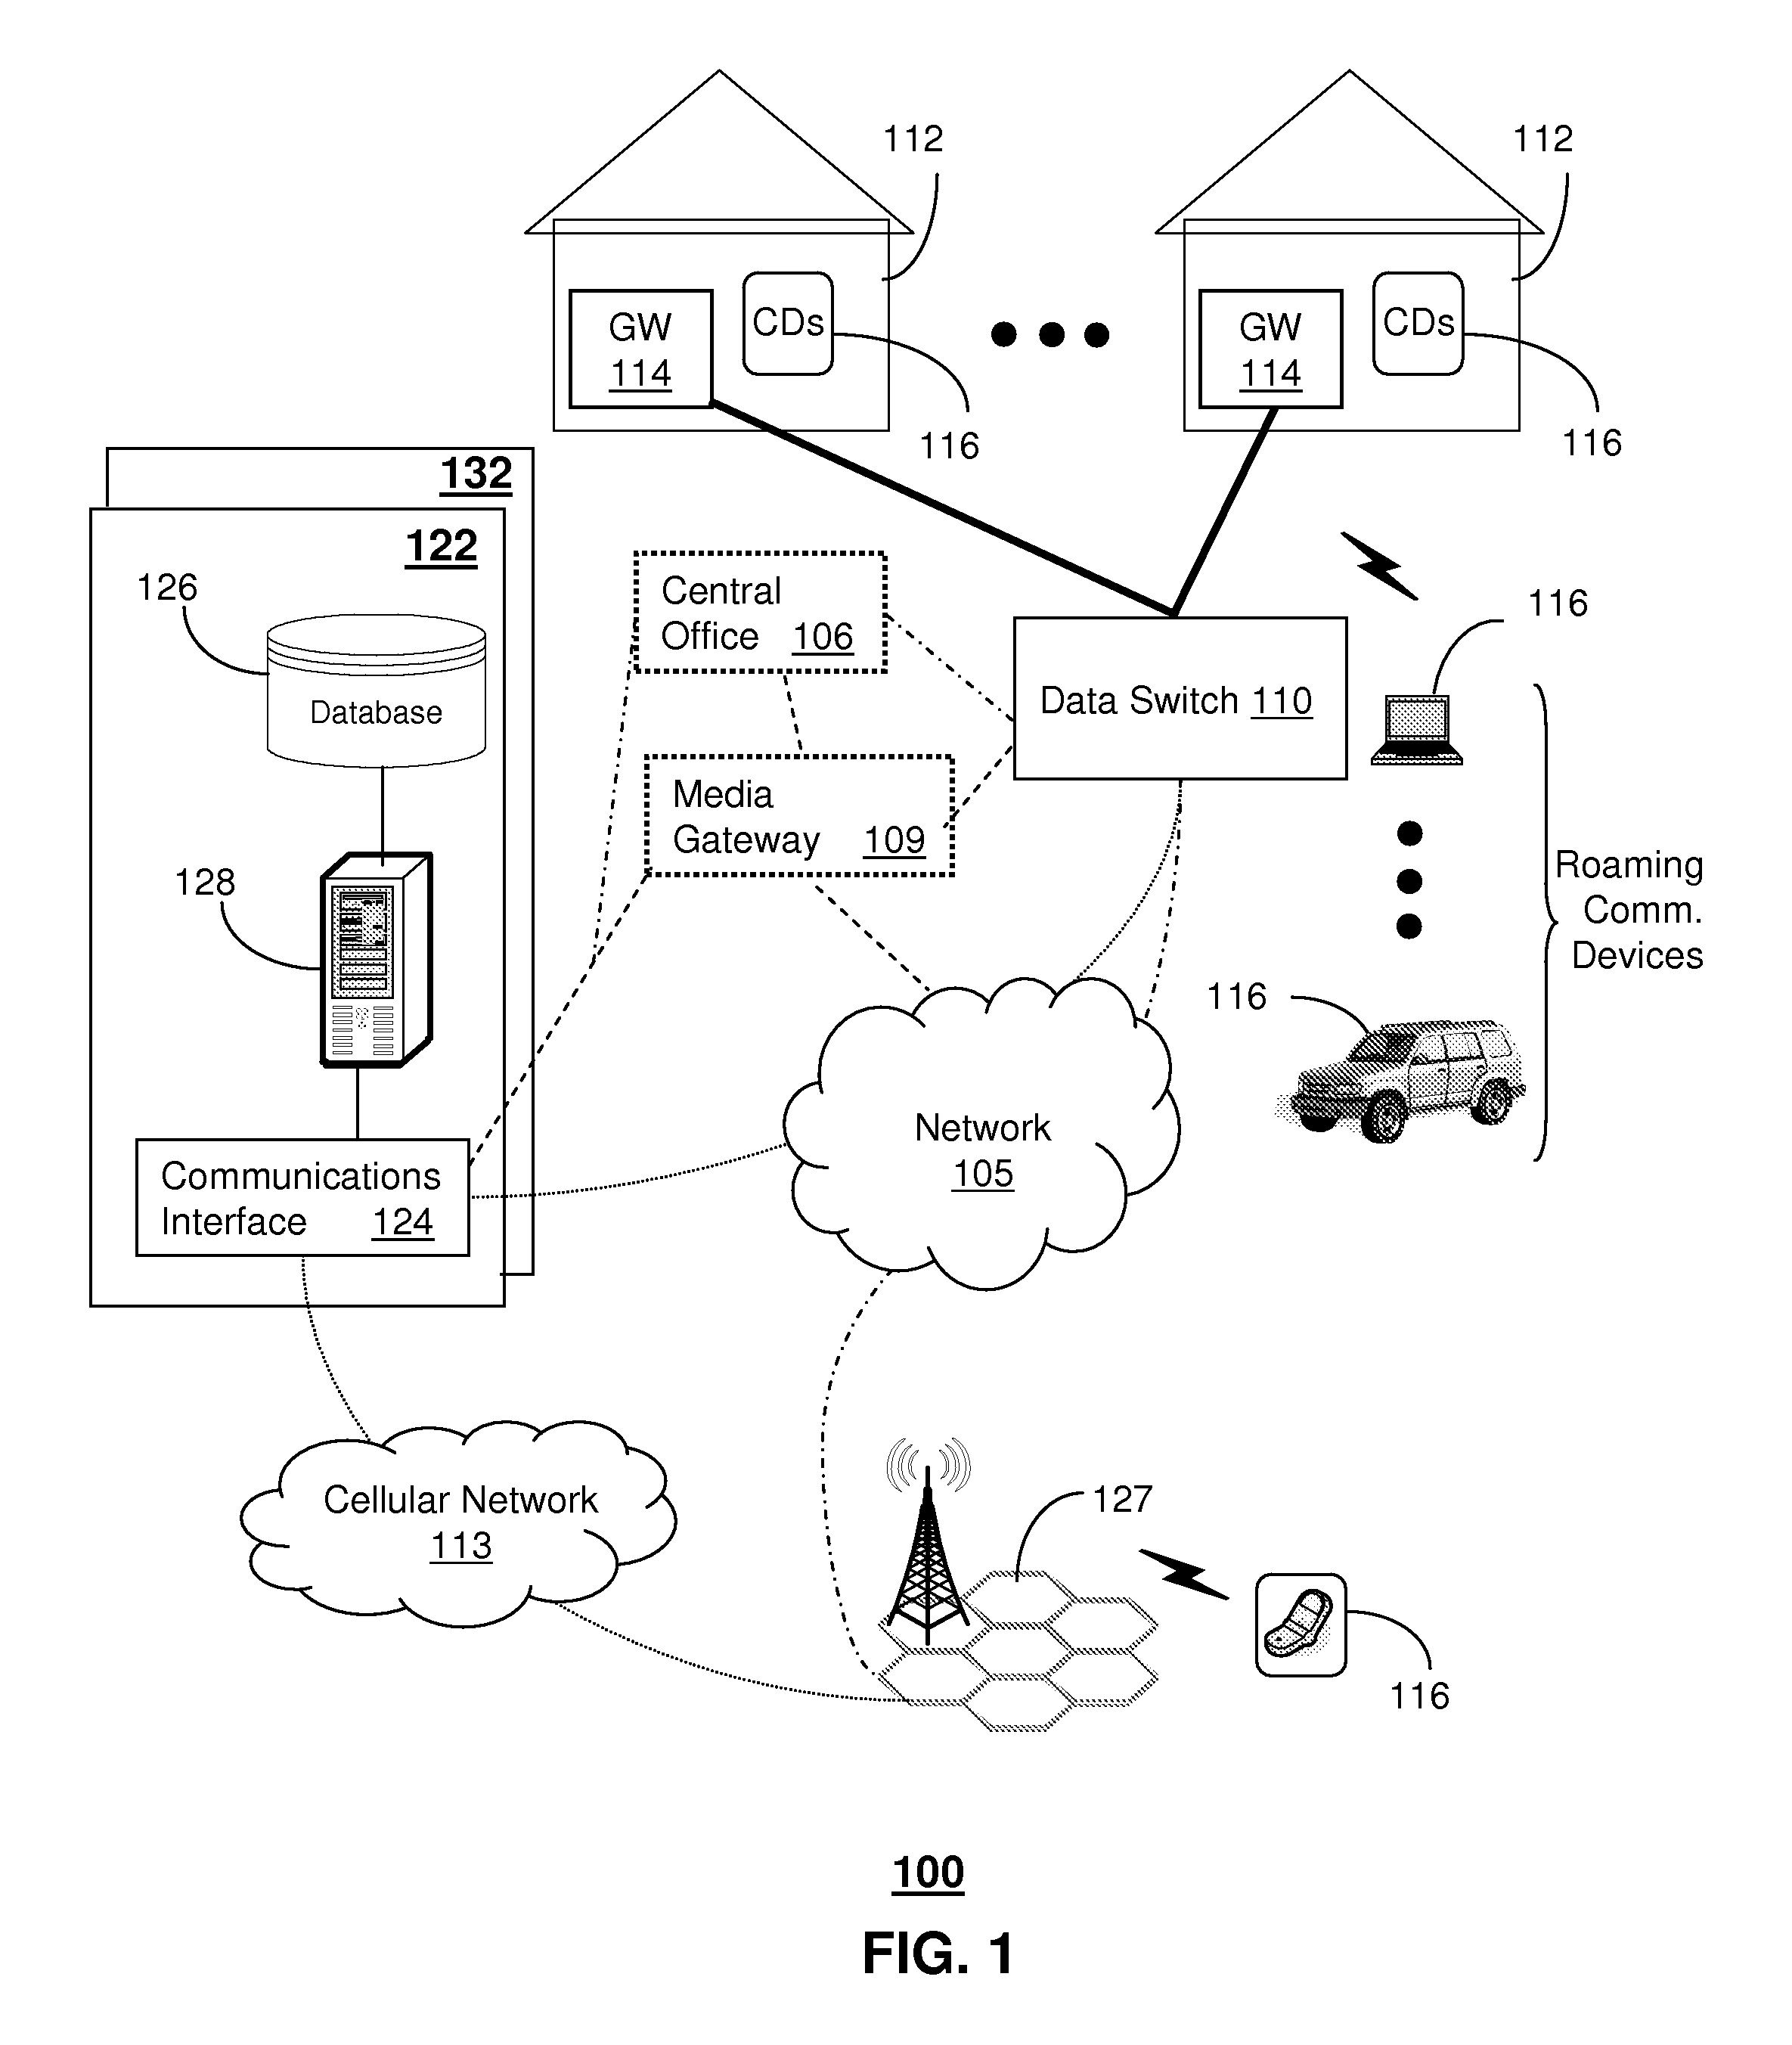 Apparatus for monitoring network connectivity